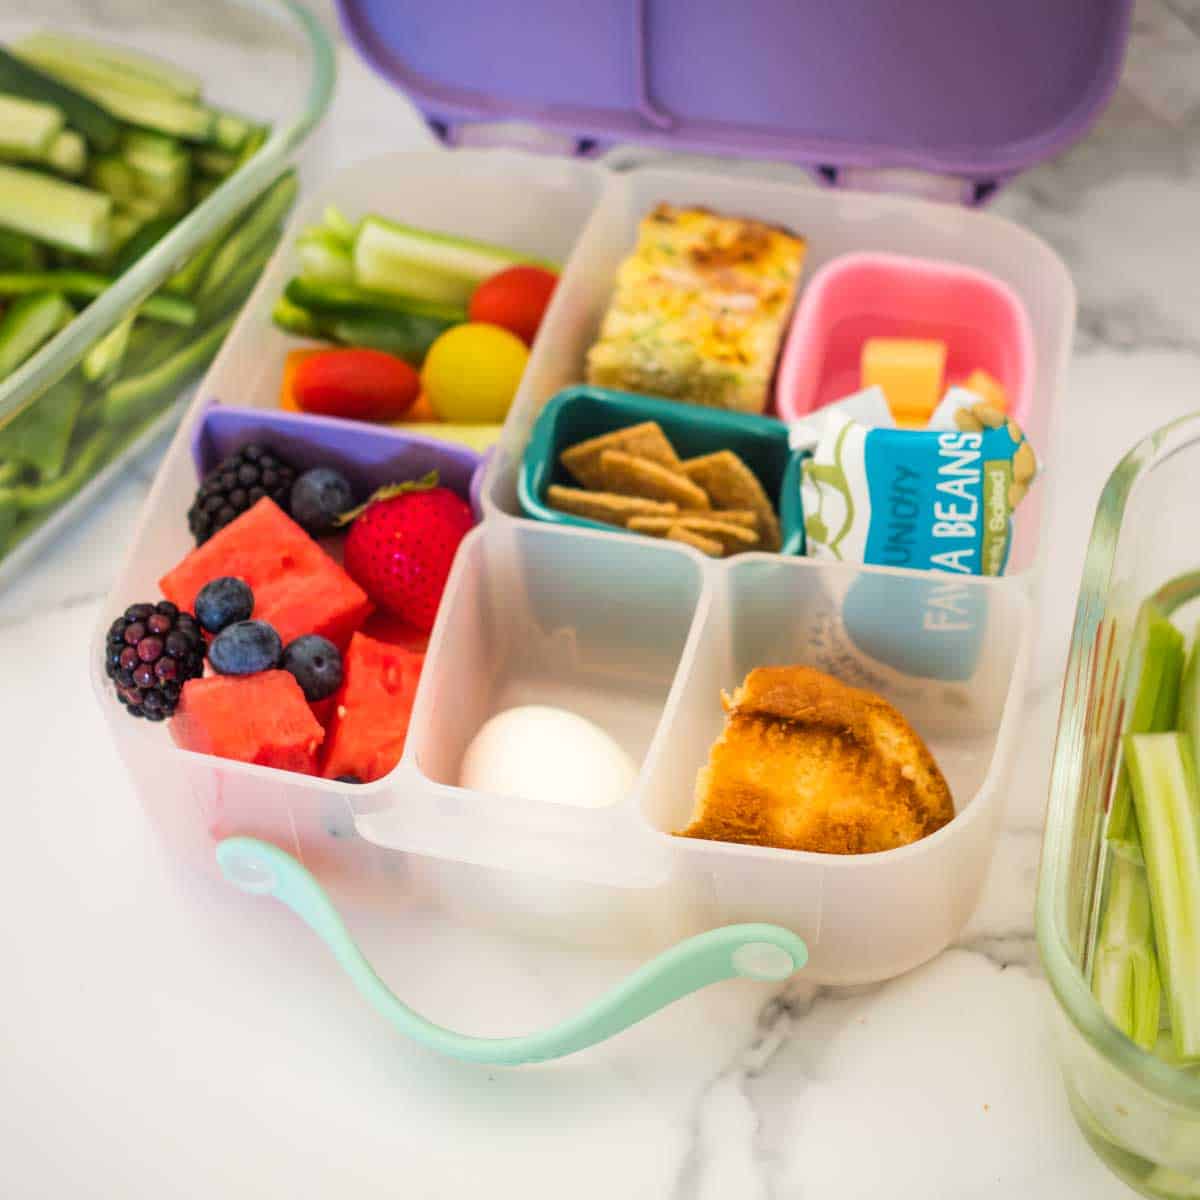 Lunchbox Meal Prep: How To Plan Ahead For A Stress-Free School Week -  Kidgredients